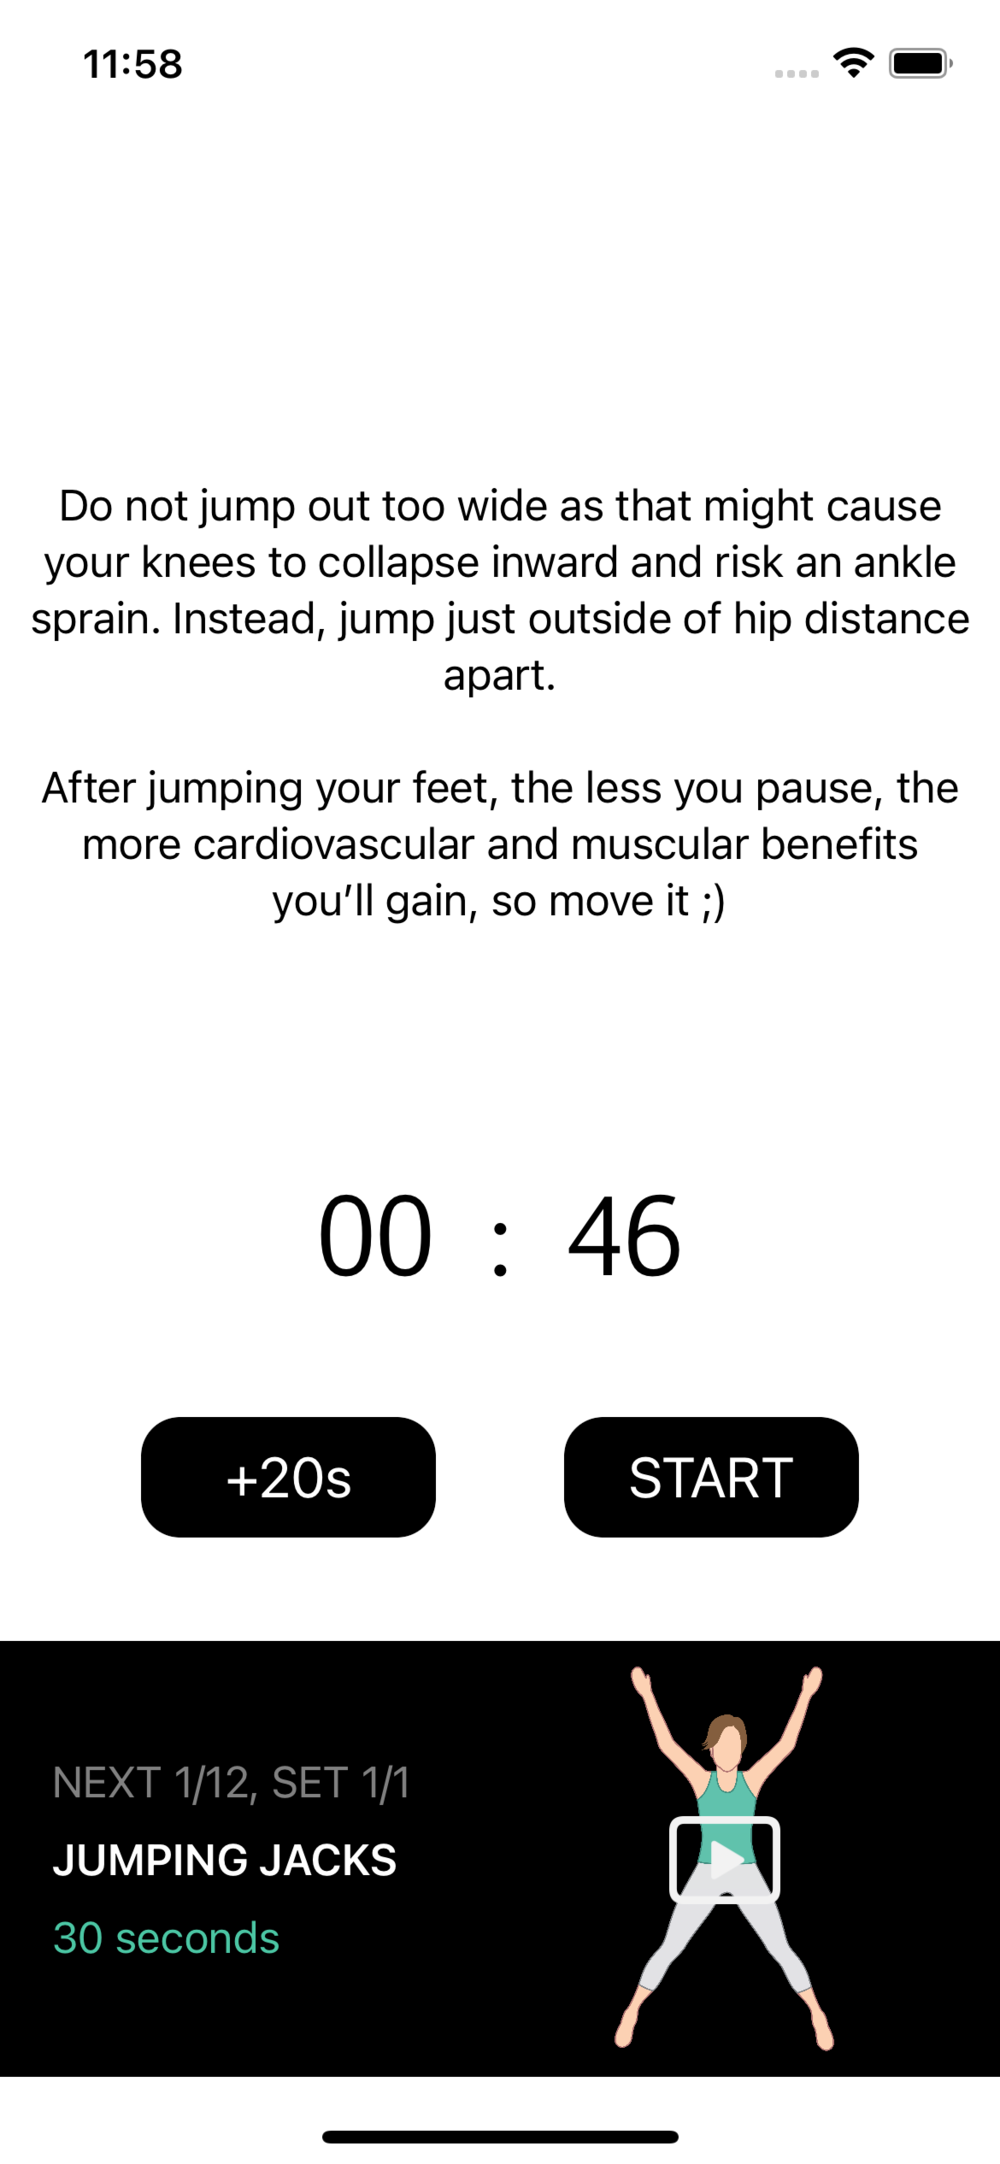 On the rest screen, say "skip" to skip it or "extend" to extend the time